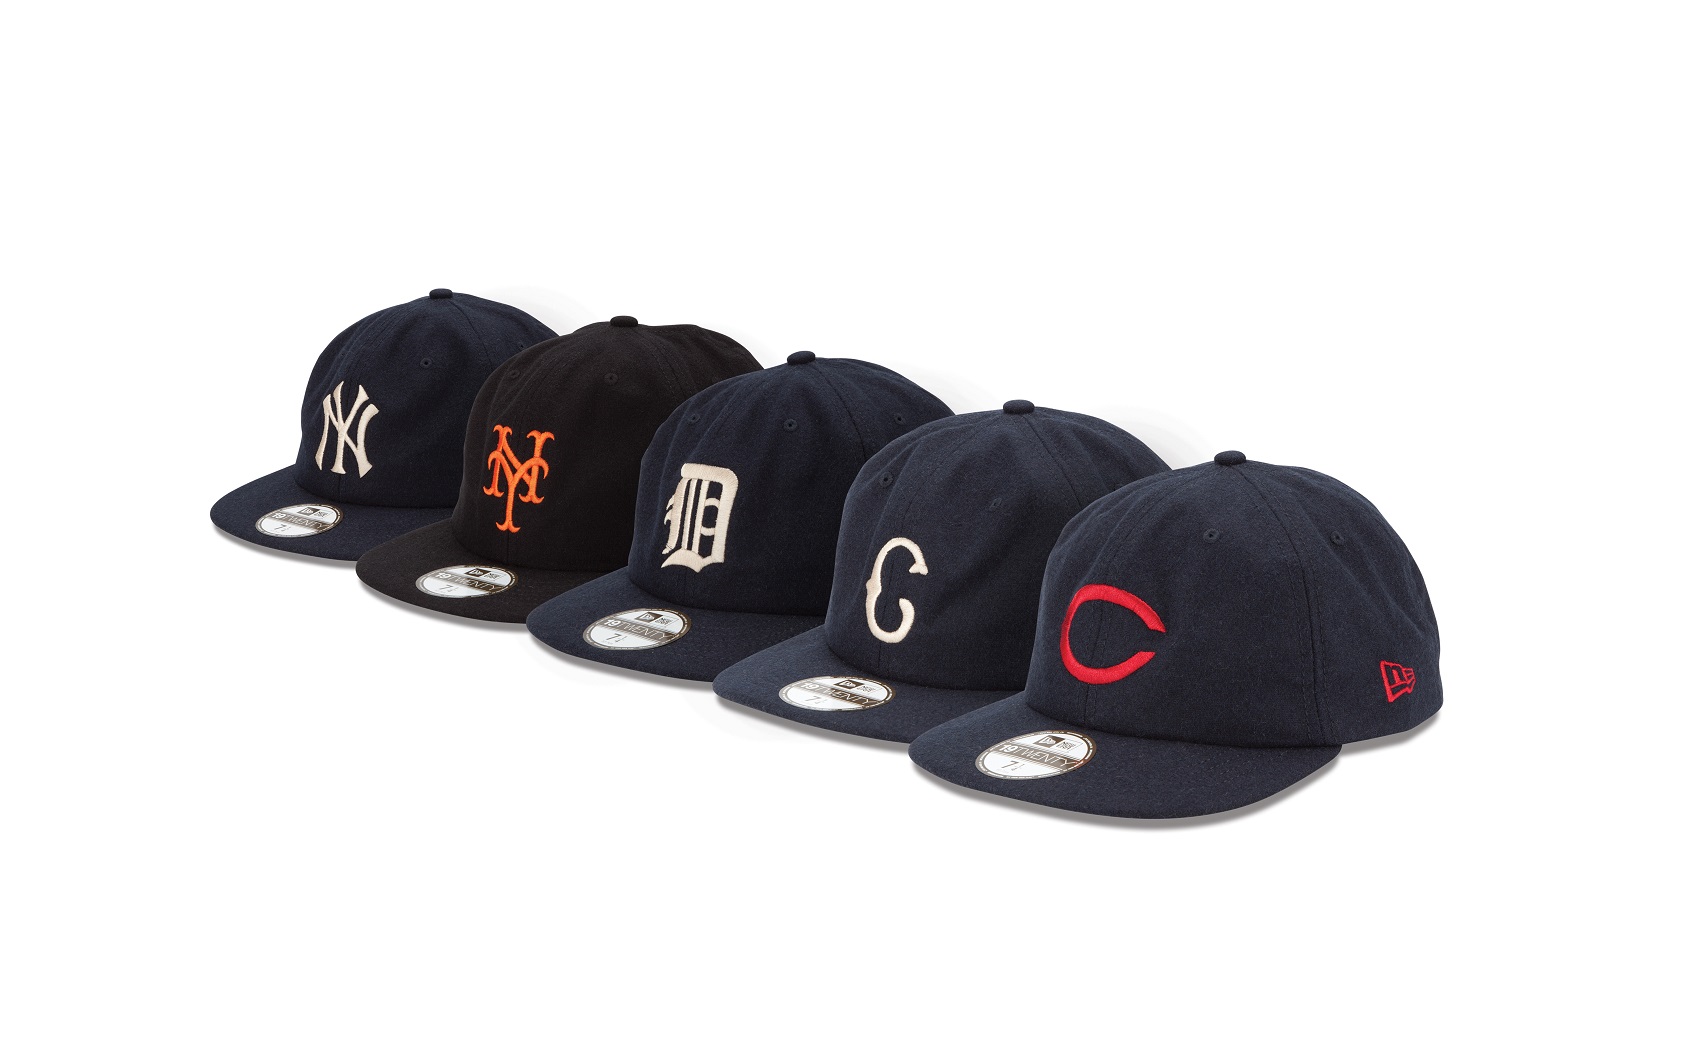 New Era 1934 Heritage Collection | FactoryTwoFour